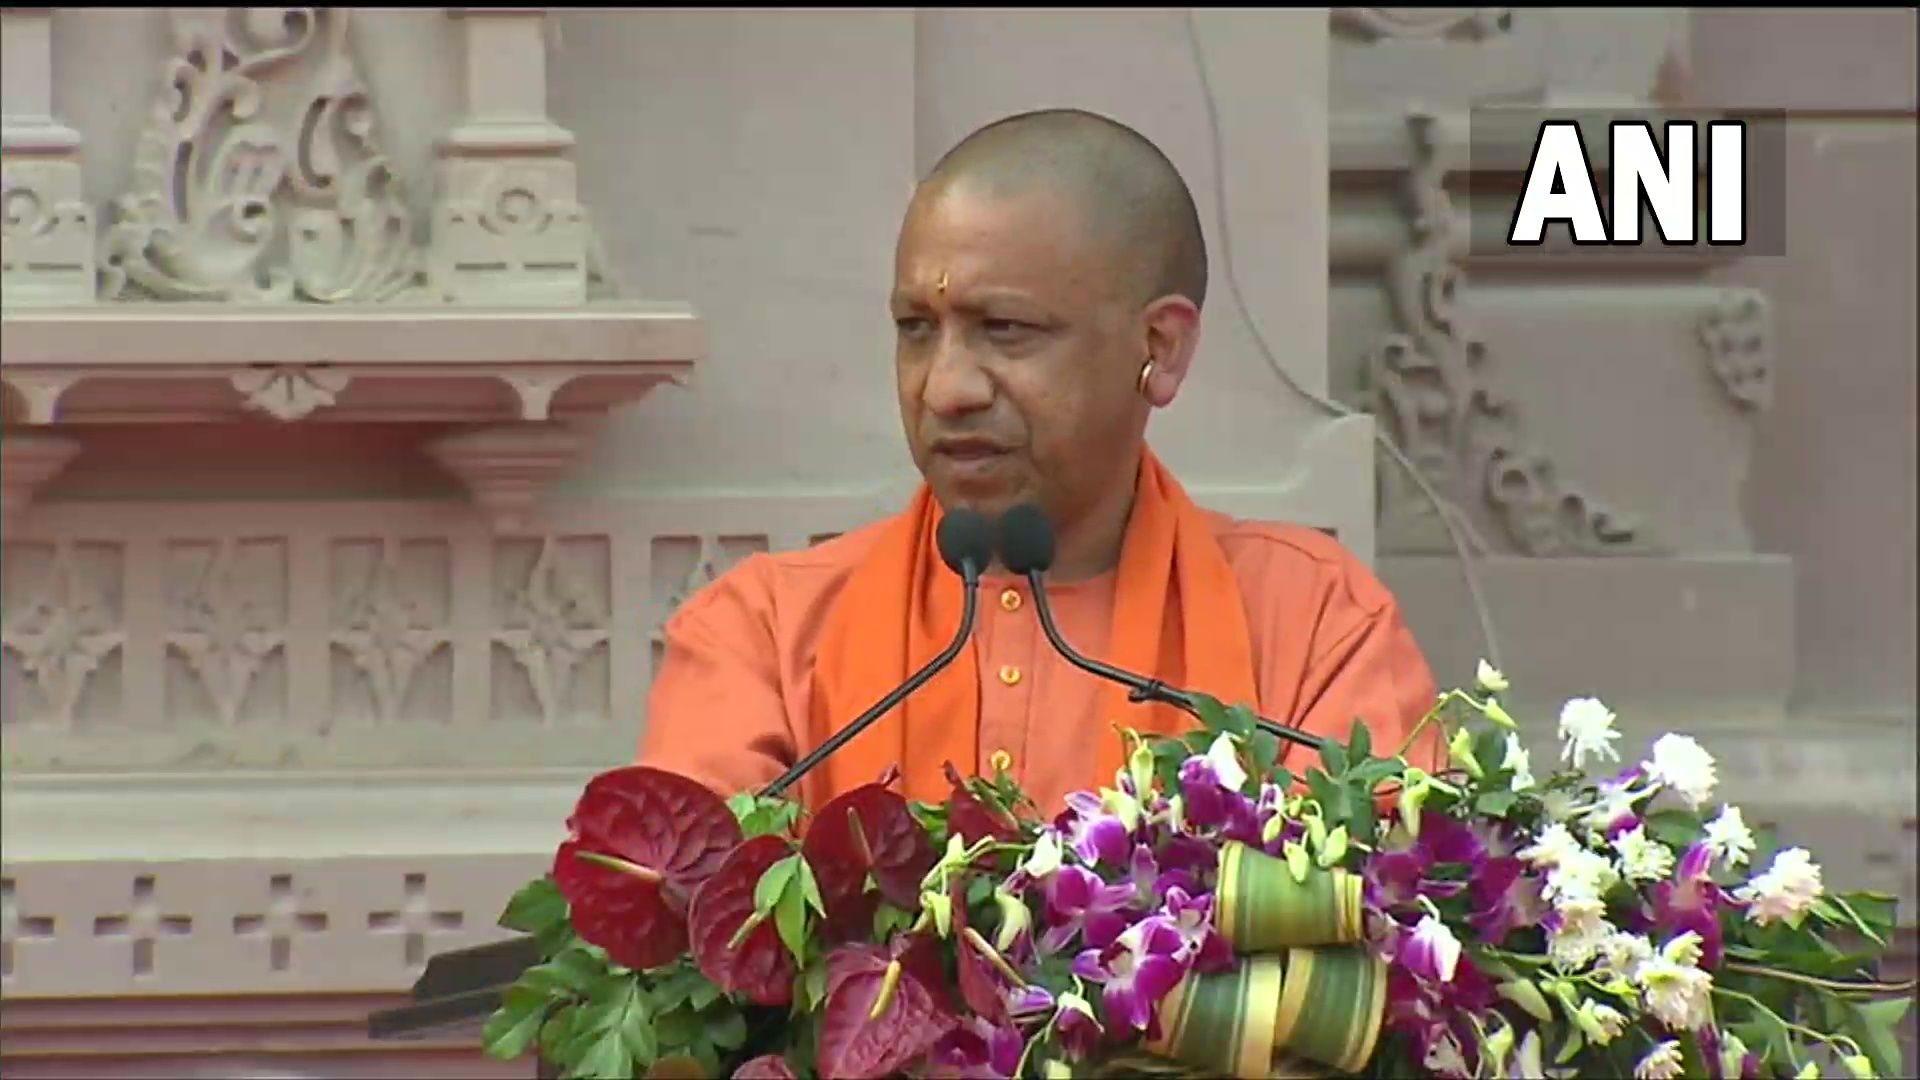 CM Yogi Adityanath: After BJP, gangsters and criminals left state, not Hindus